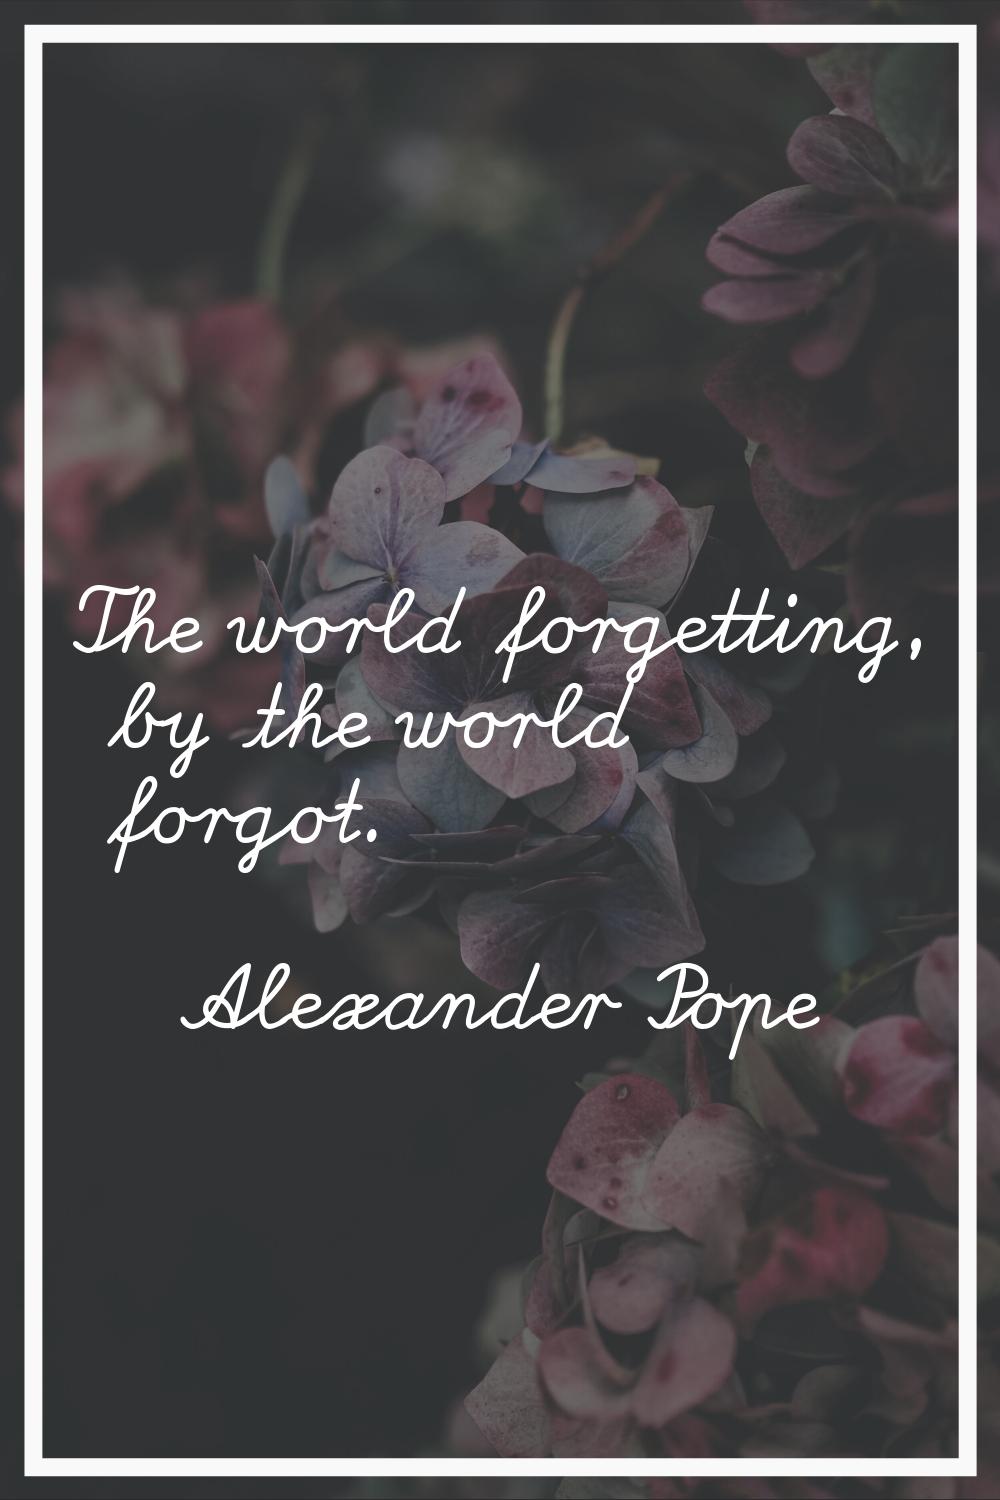 The world forgetting, by the world forgot.